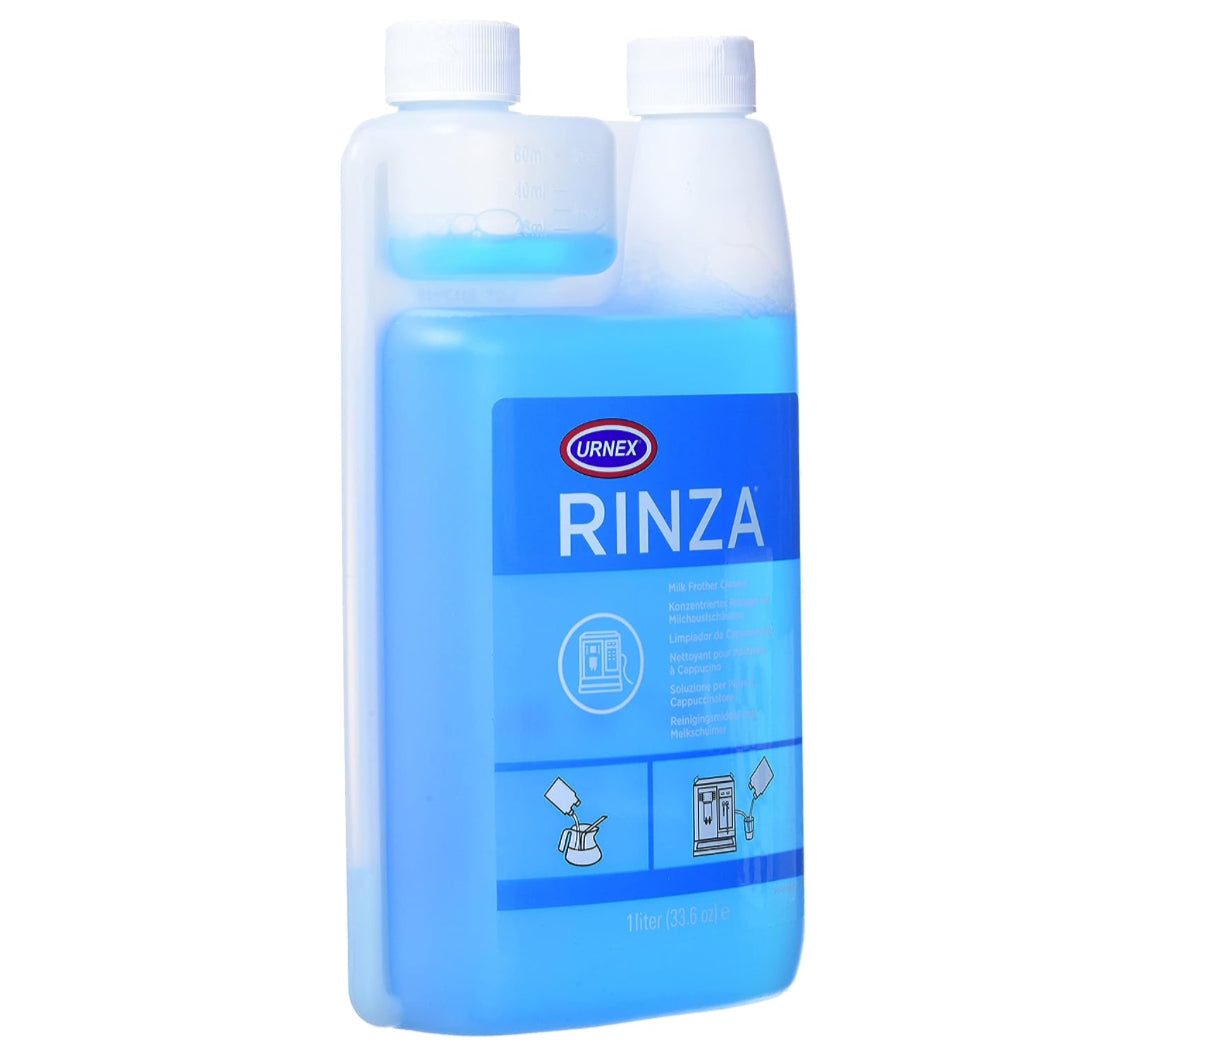 Urnex Rinza Acid Formula Milk Frother Cleaner, 33.8-Ounce